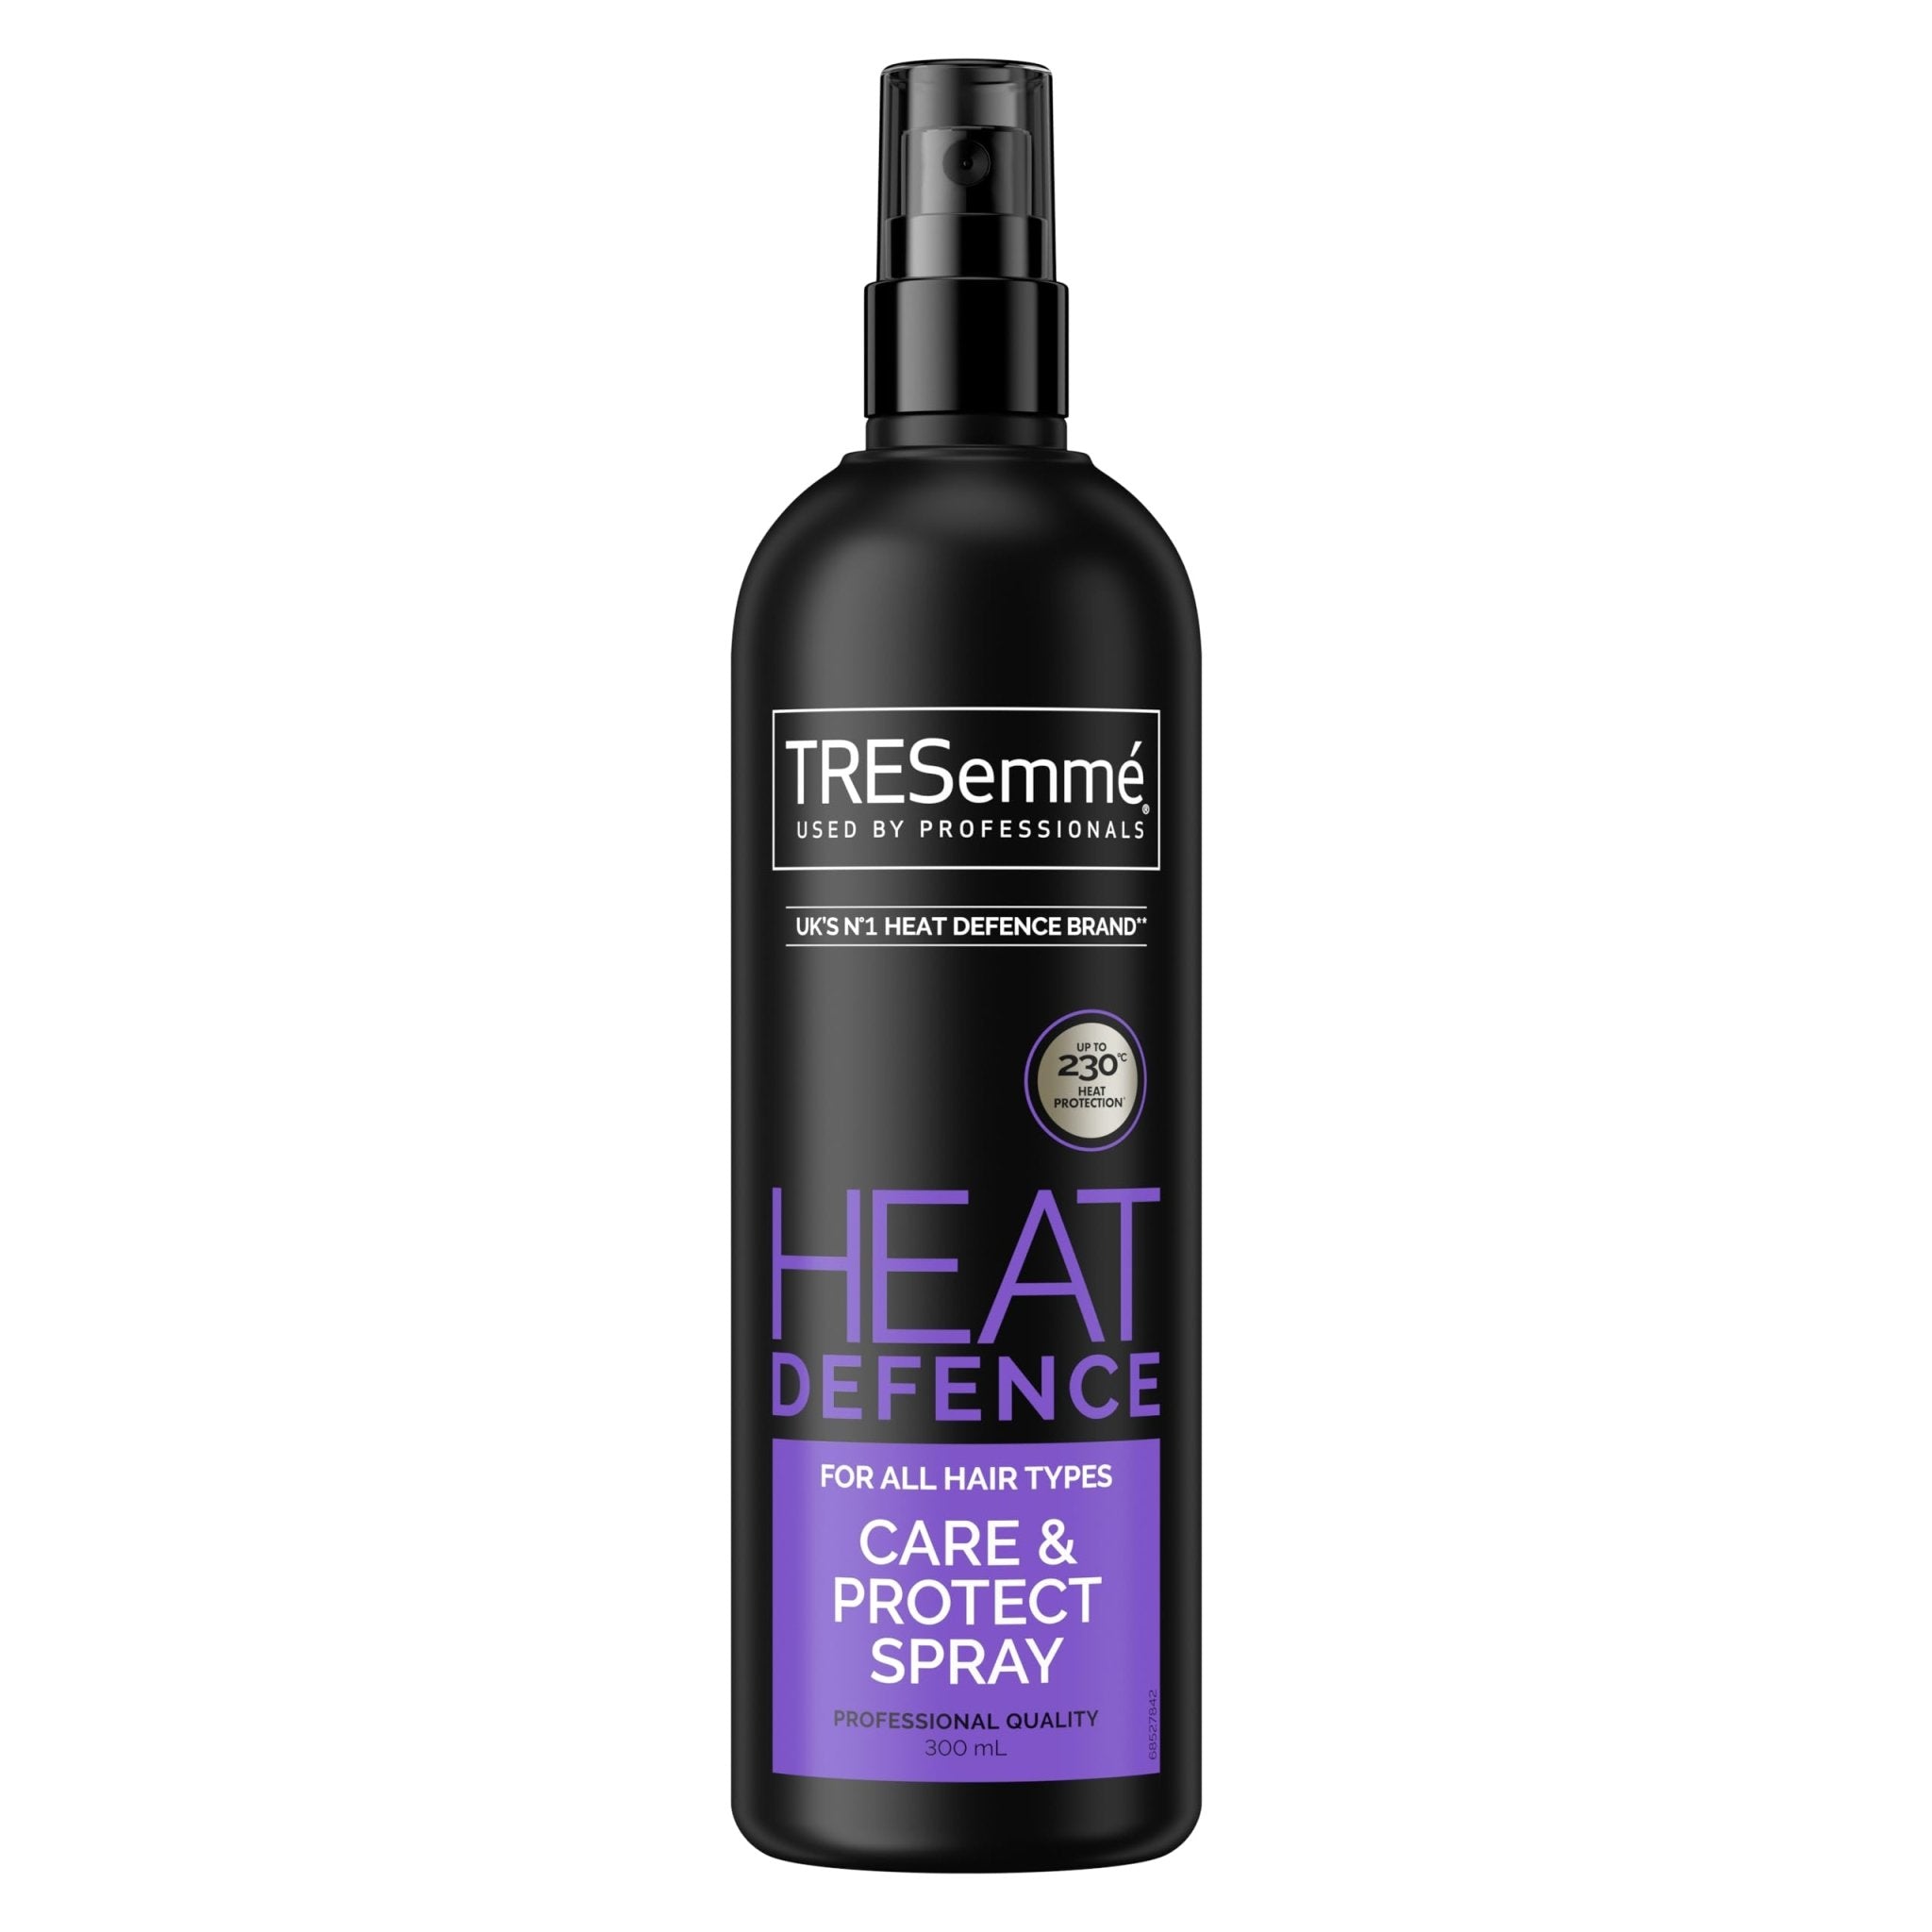 TRESemmé Care & Protect Heat Defence Spray 300 ml - Ammpoure Wellbeing